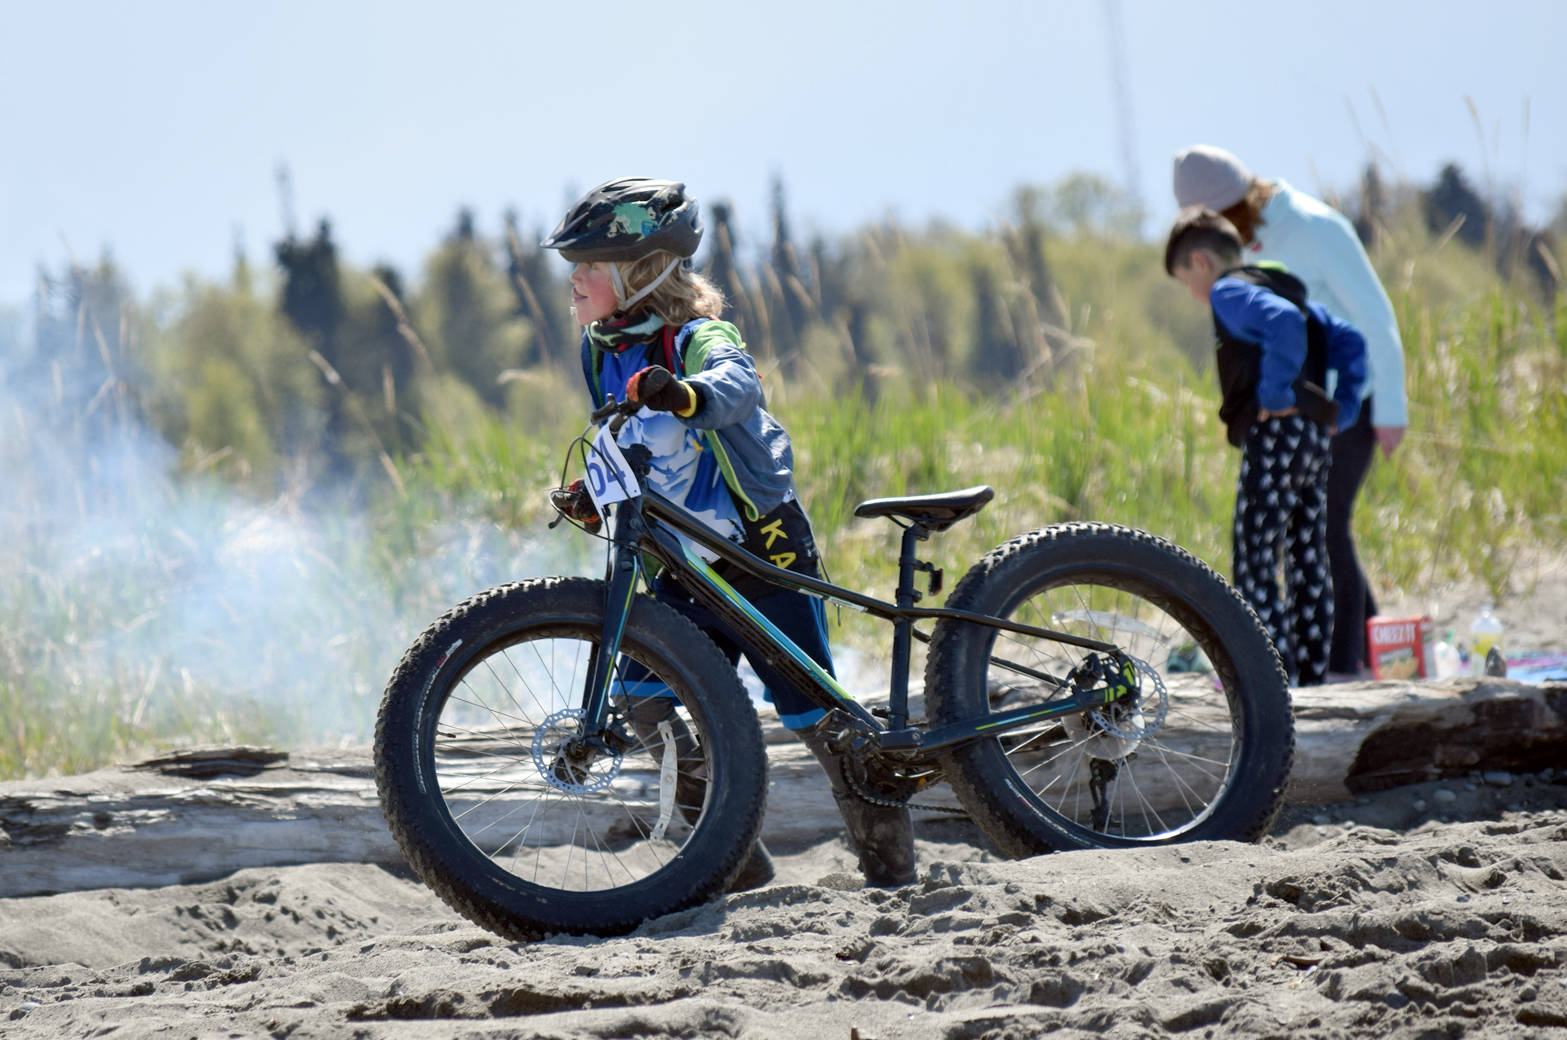 Lukas Renner, 8, gets off his bike to walk through the soft sand before the final hill to the finish Monday, May 29, 2017, at the Mouth to Mouth Wild Run and Ride. Many riders were calling that soft sand and hill the toughest part of the course. (Photo by Jeff Helminiak/Peninsula Clarion)